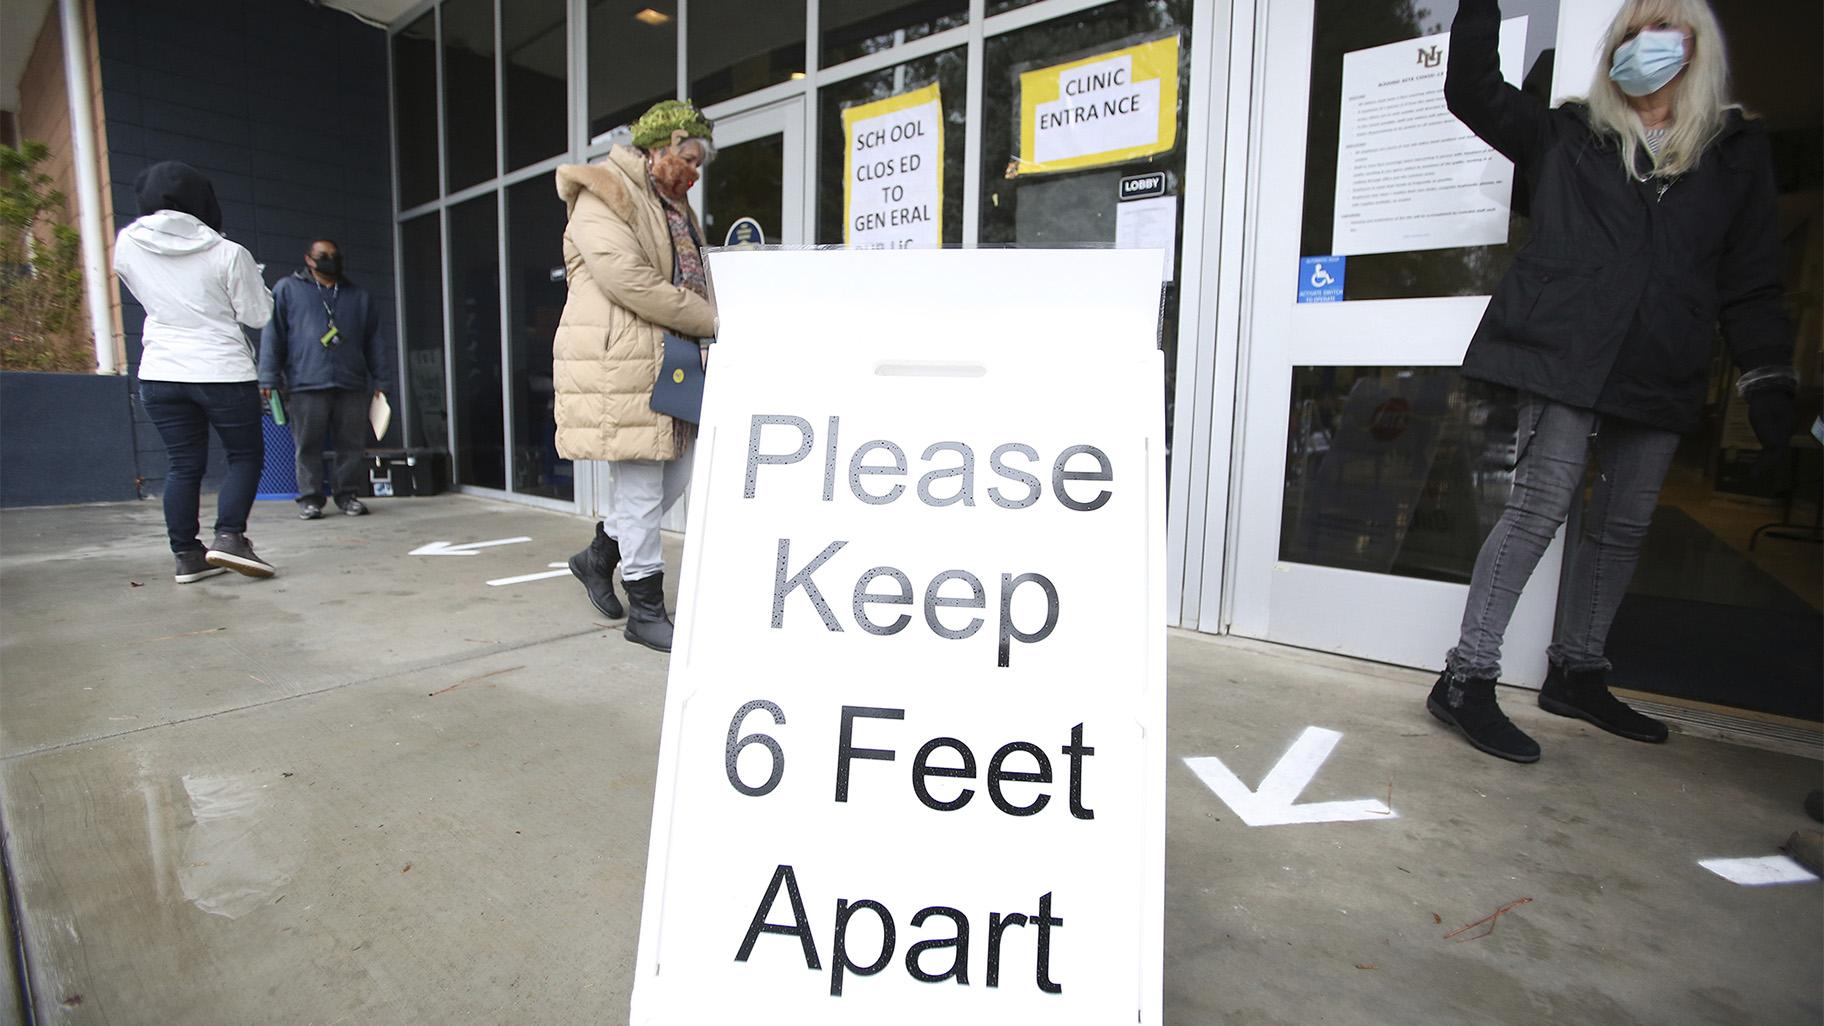 A sign asks those getting vaccinated to keep 6 feet apart during the vaccination event, Wednesday, Jan. 27, 2021, at Nevada Union High School in Grass Valley, Calif. (Elias Funez / The Union via AP, File)